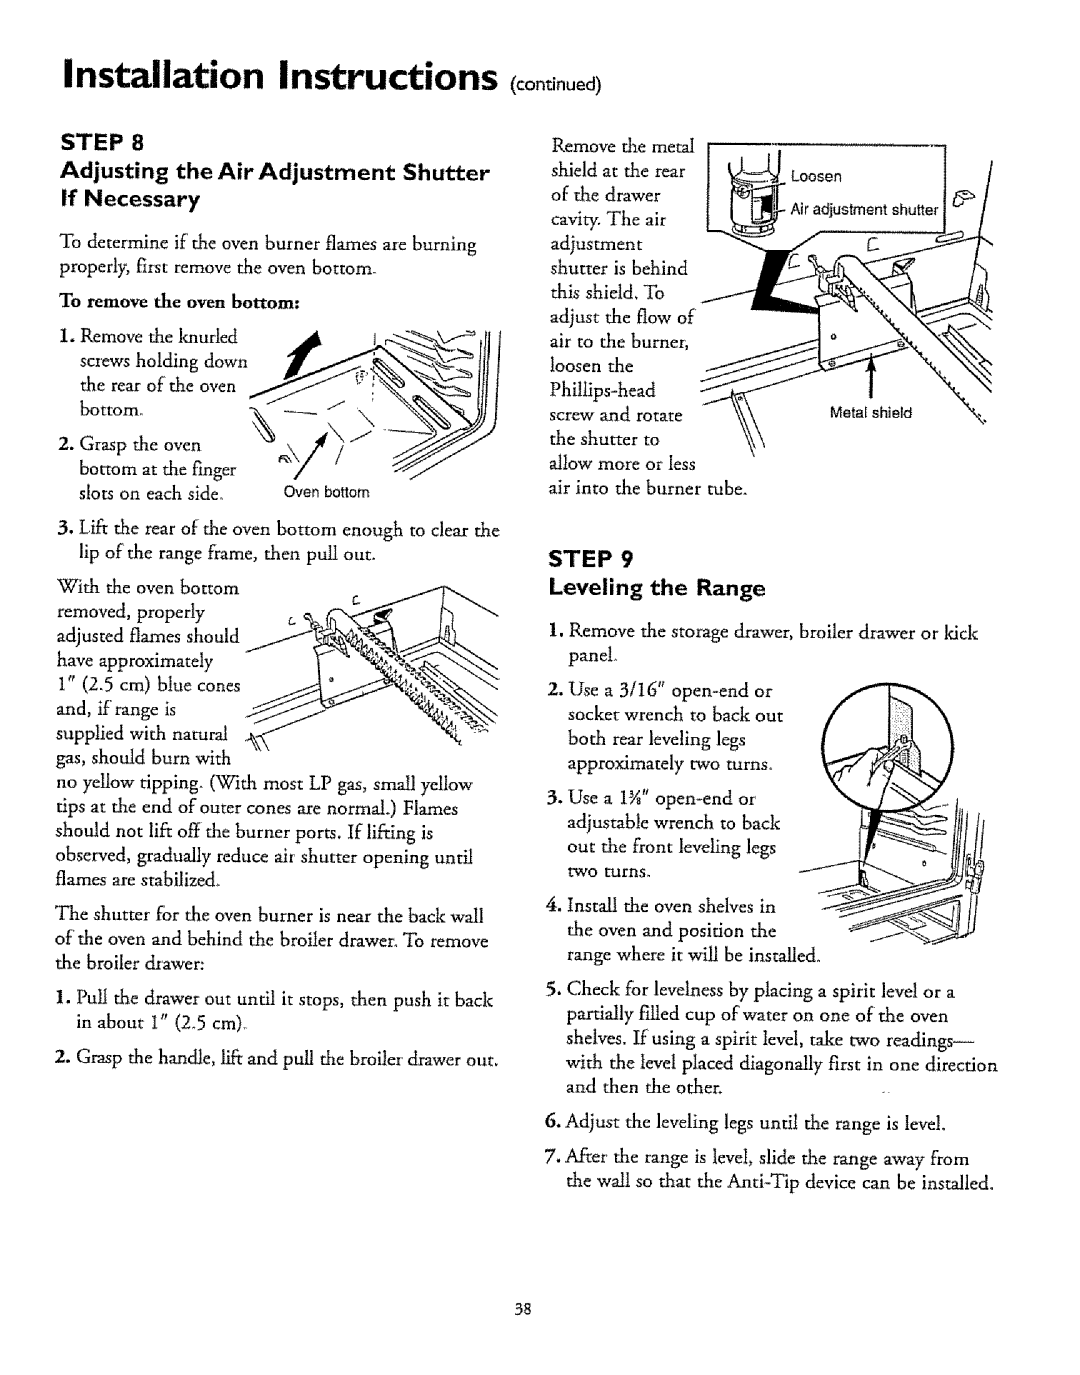 Sears 71358 Installation Instructions, Step, Adjusting the Air Adjustment Shutter if Necessary, To remove the oven bottom 